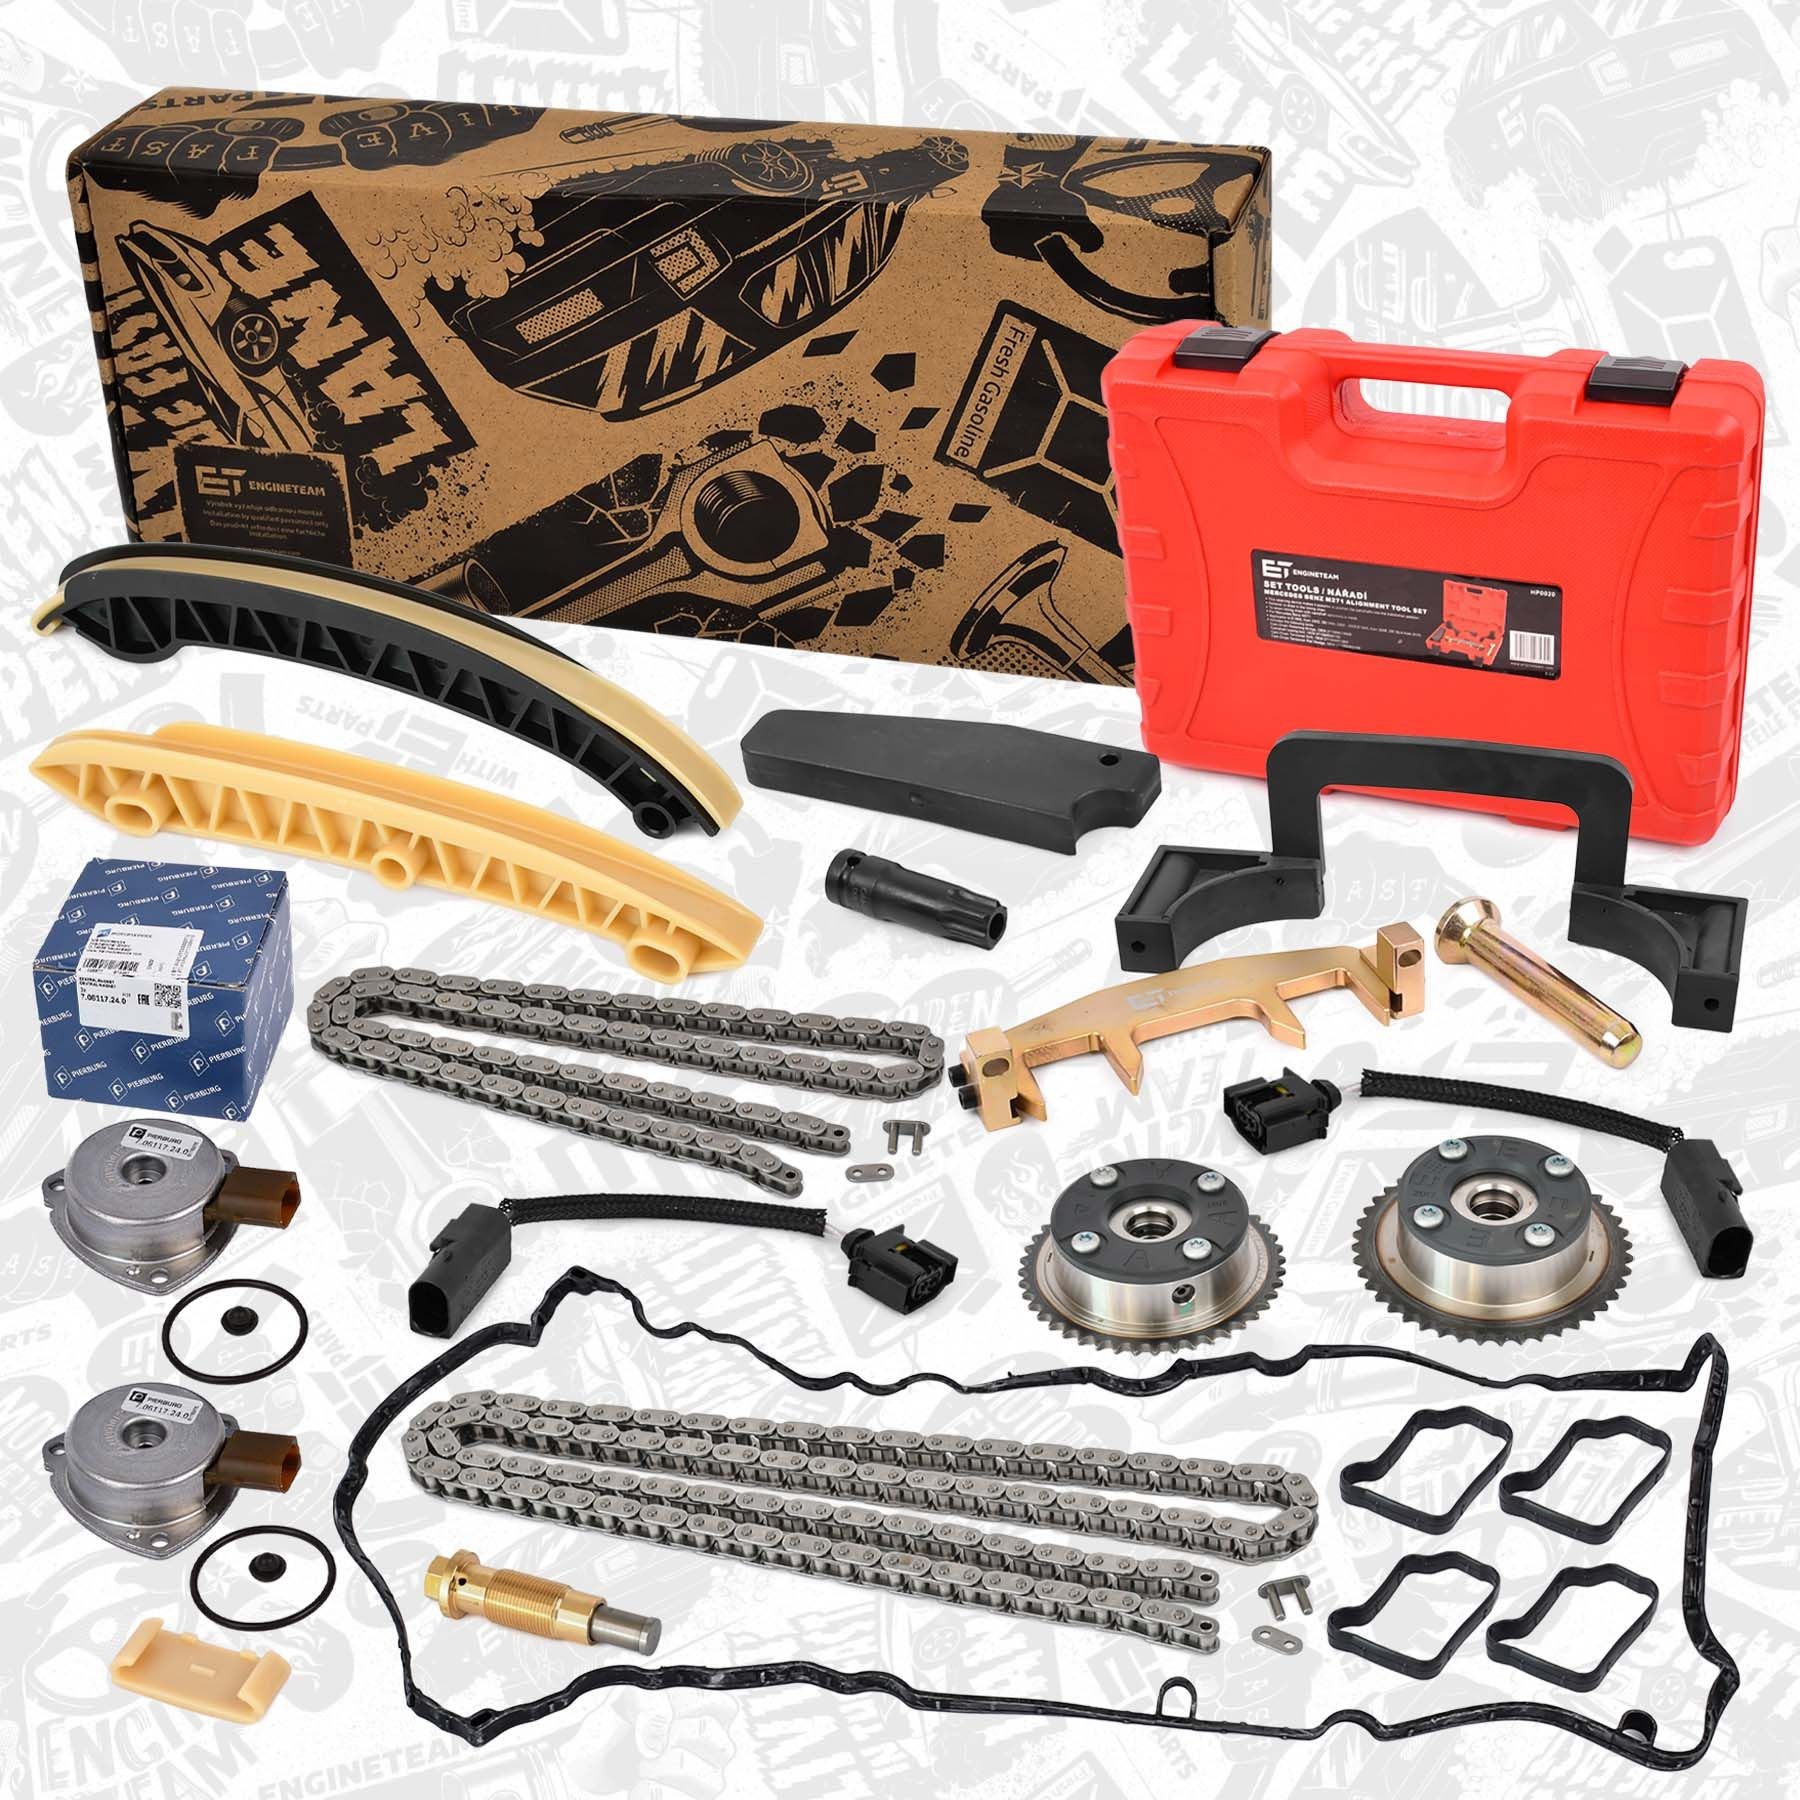 RS0108VR2 ET ENGINETEAM Timing Chain Kit with accessories, with